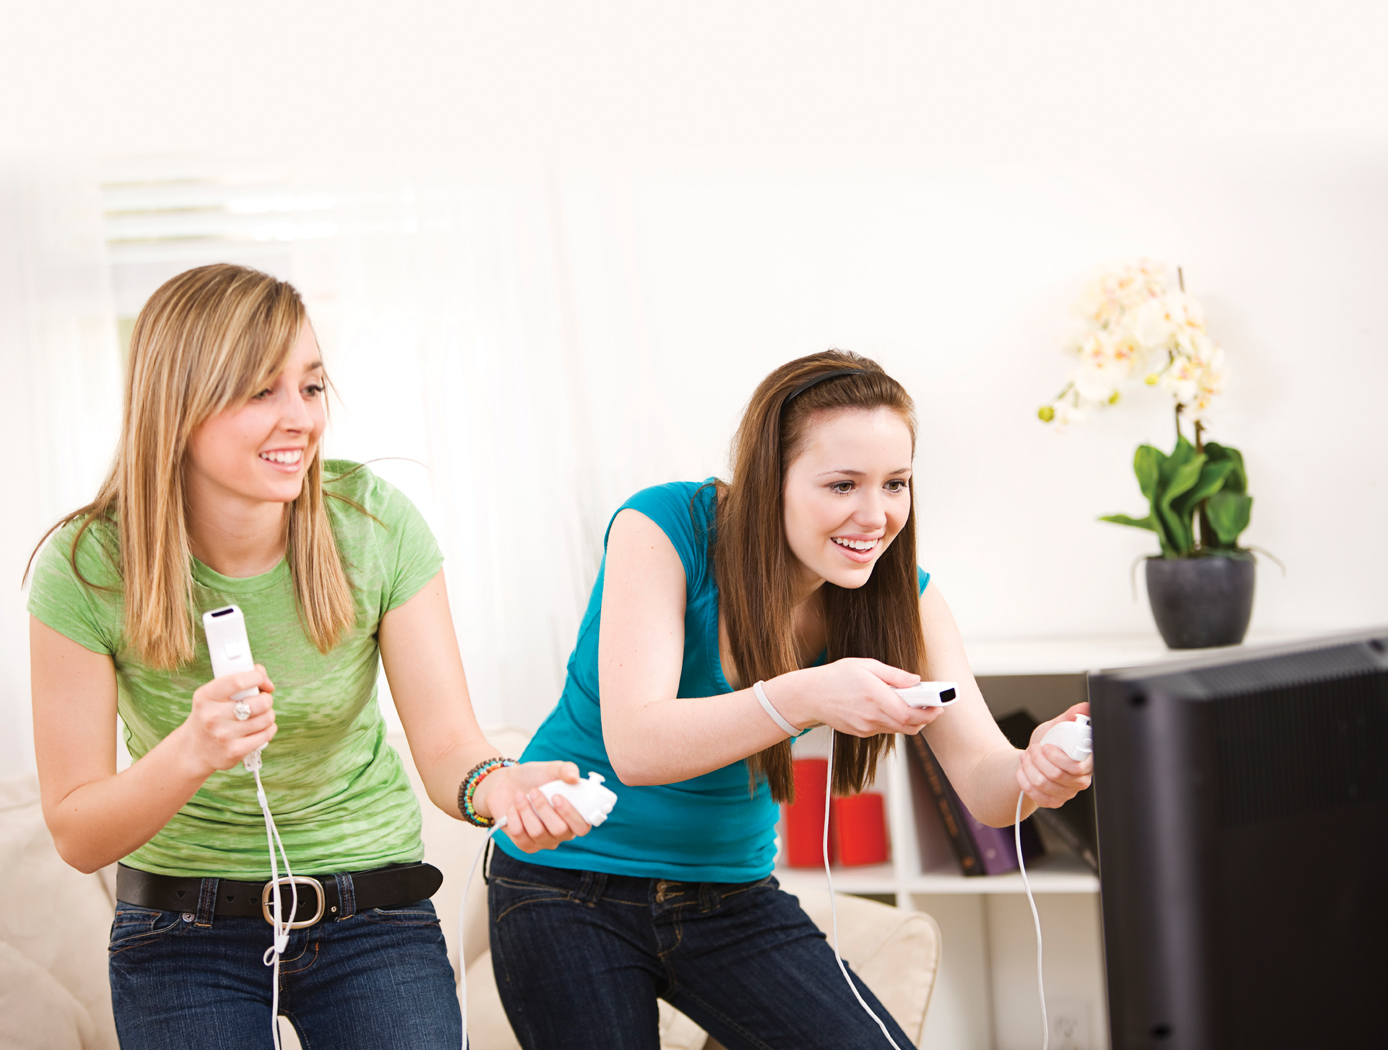 Two young women playing video games